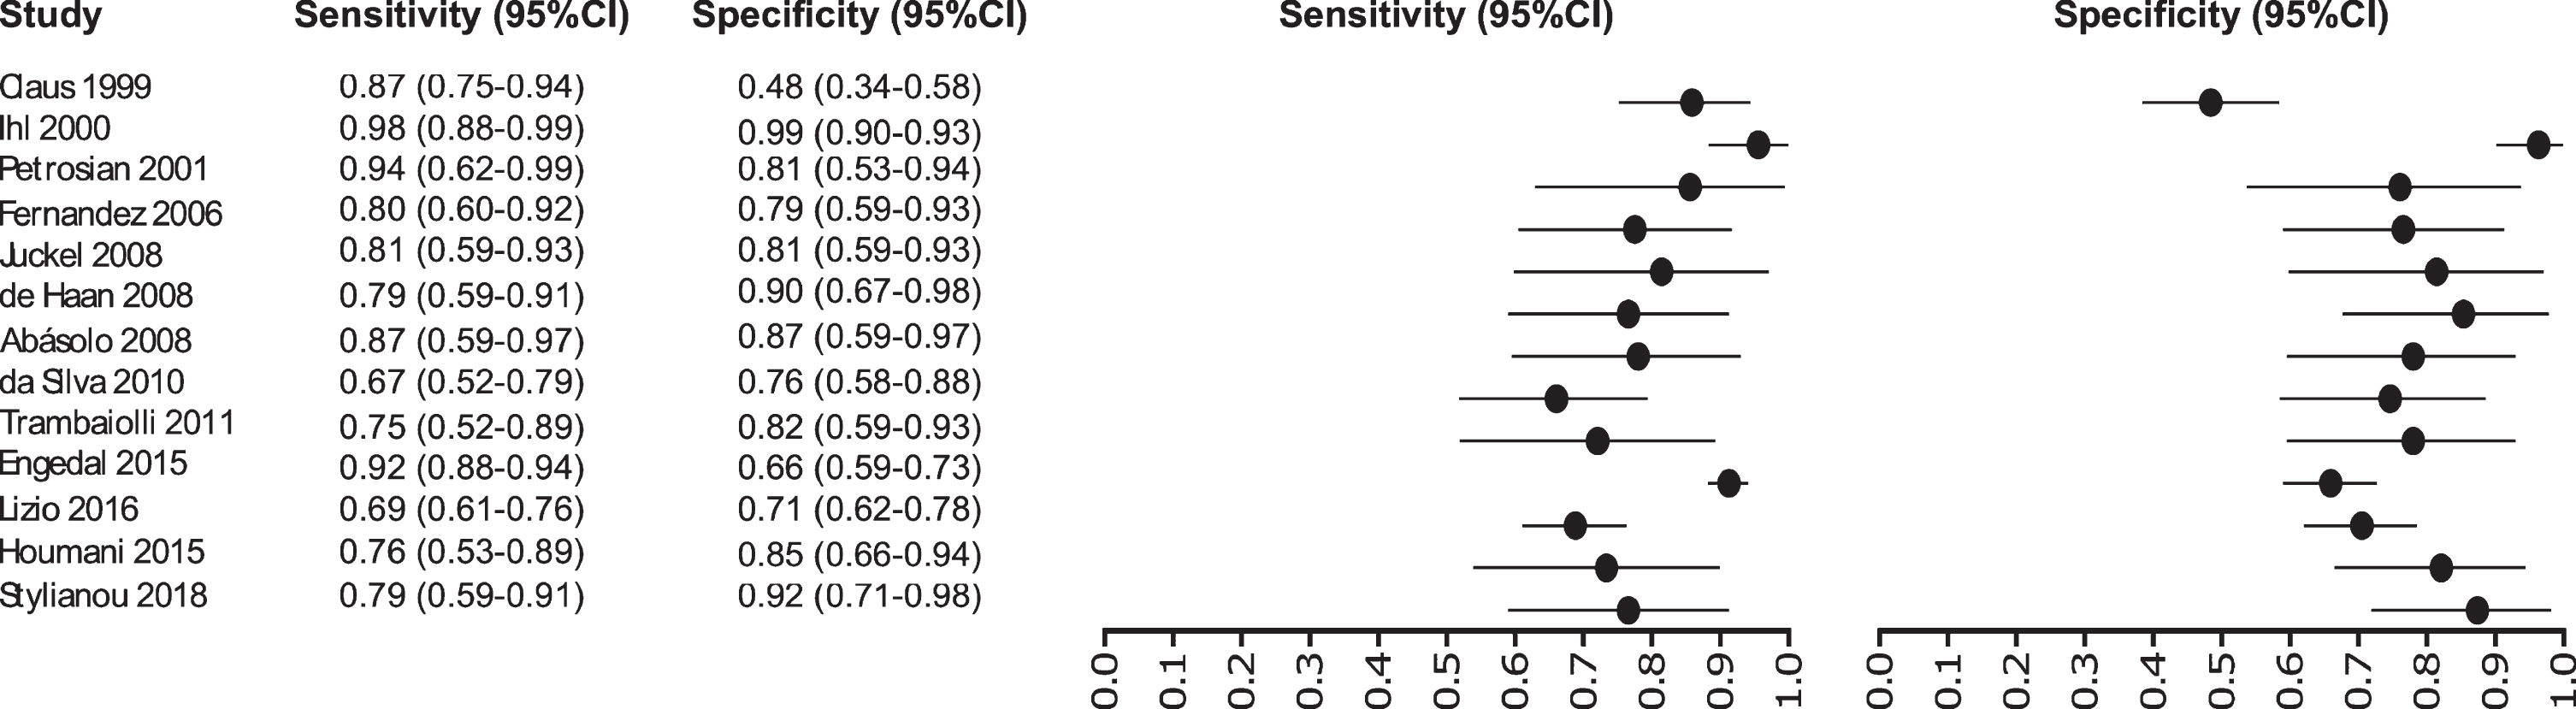 Study data and paired forest plot of the sensitivity and specificity of tau-PET in Alzheimer’s disease diagnosis. Data from each study are summarized. Sensitivity and specificity are reported with a mean (95% confidence limits). Forest plot depicts the estimated sensitivity and specificity (black circles) and its 95% confidence limits (horizontal black line).